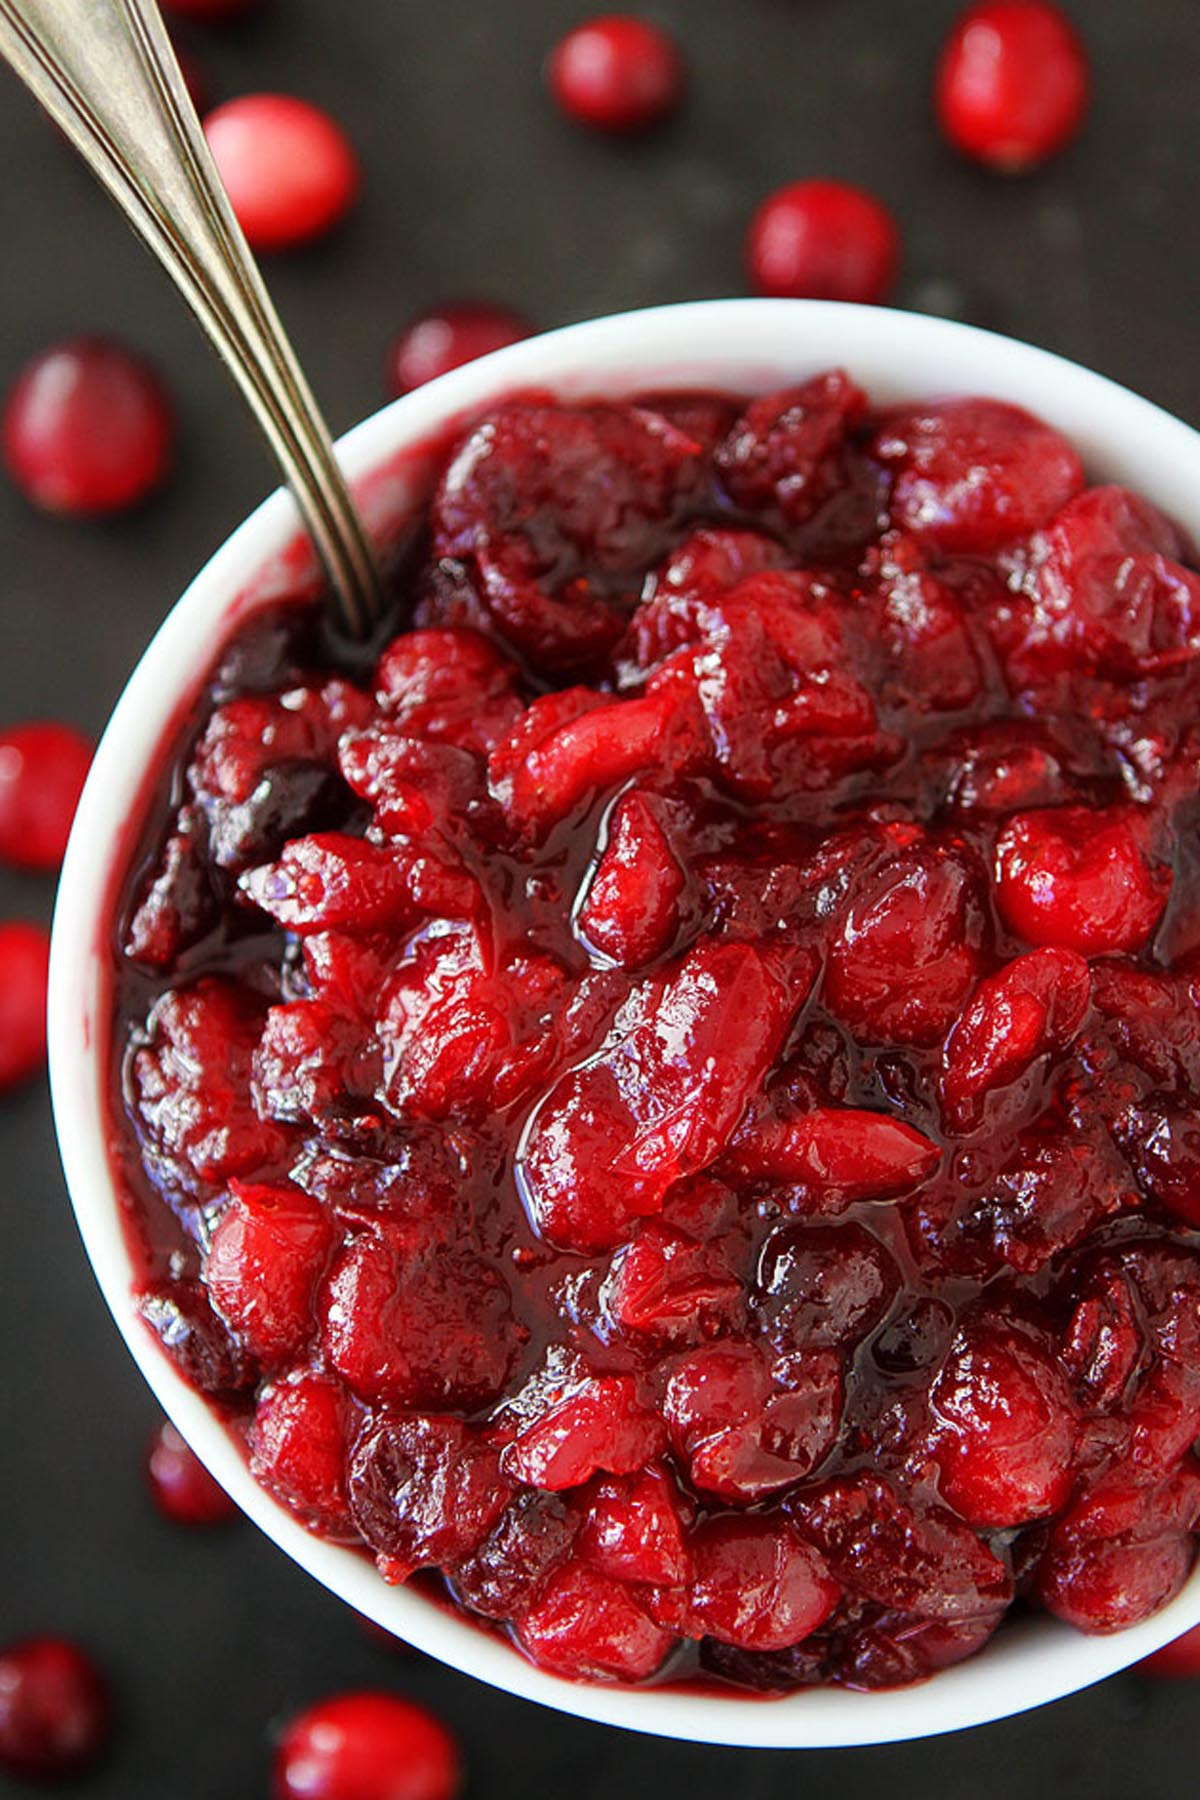 Recipes With Cranberry Sauce
 13 Easy Cranberry Sauce Recipes for Thanksgiving How to